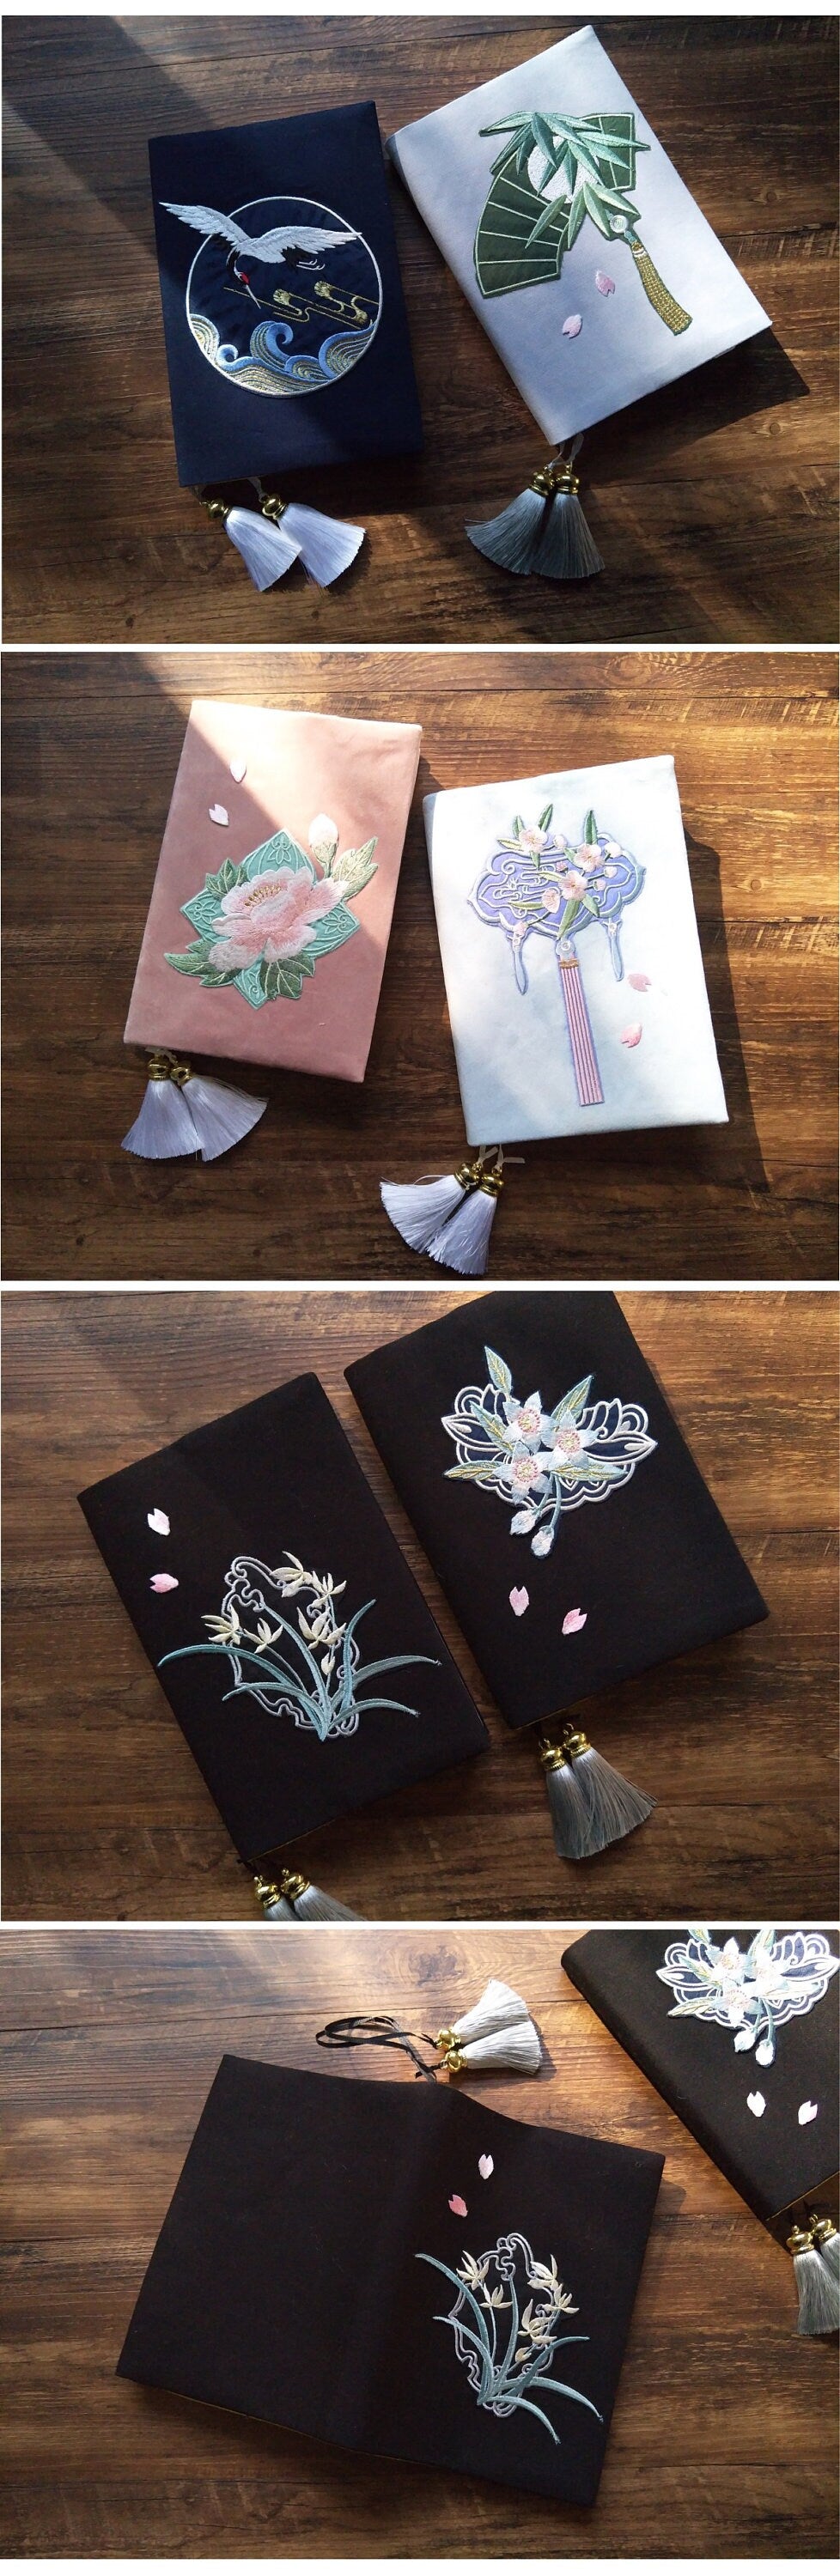 Personalized Handmade Notebook Cover A5 Size Embroidery Journal Sleeve Antique Fabric Planner Bamboo Orchid Crane Traveler's Notebook Gift